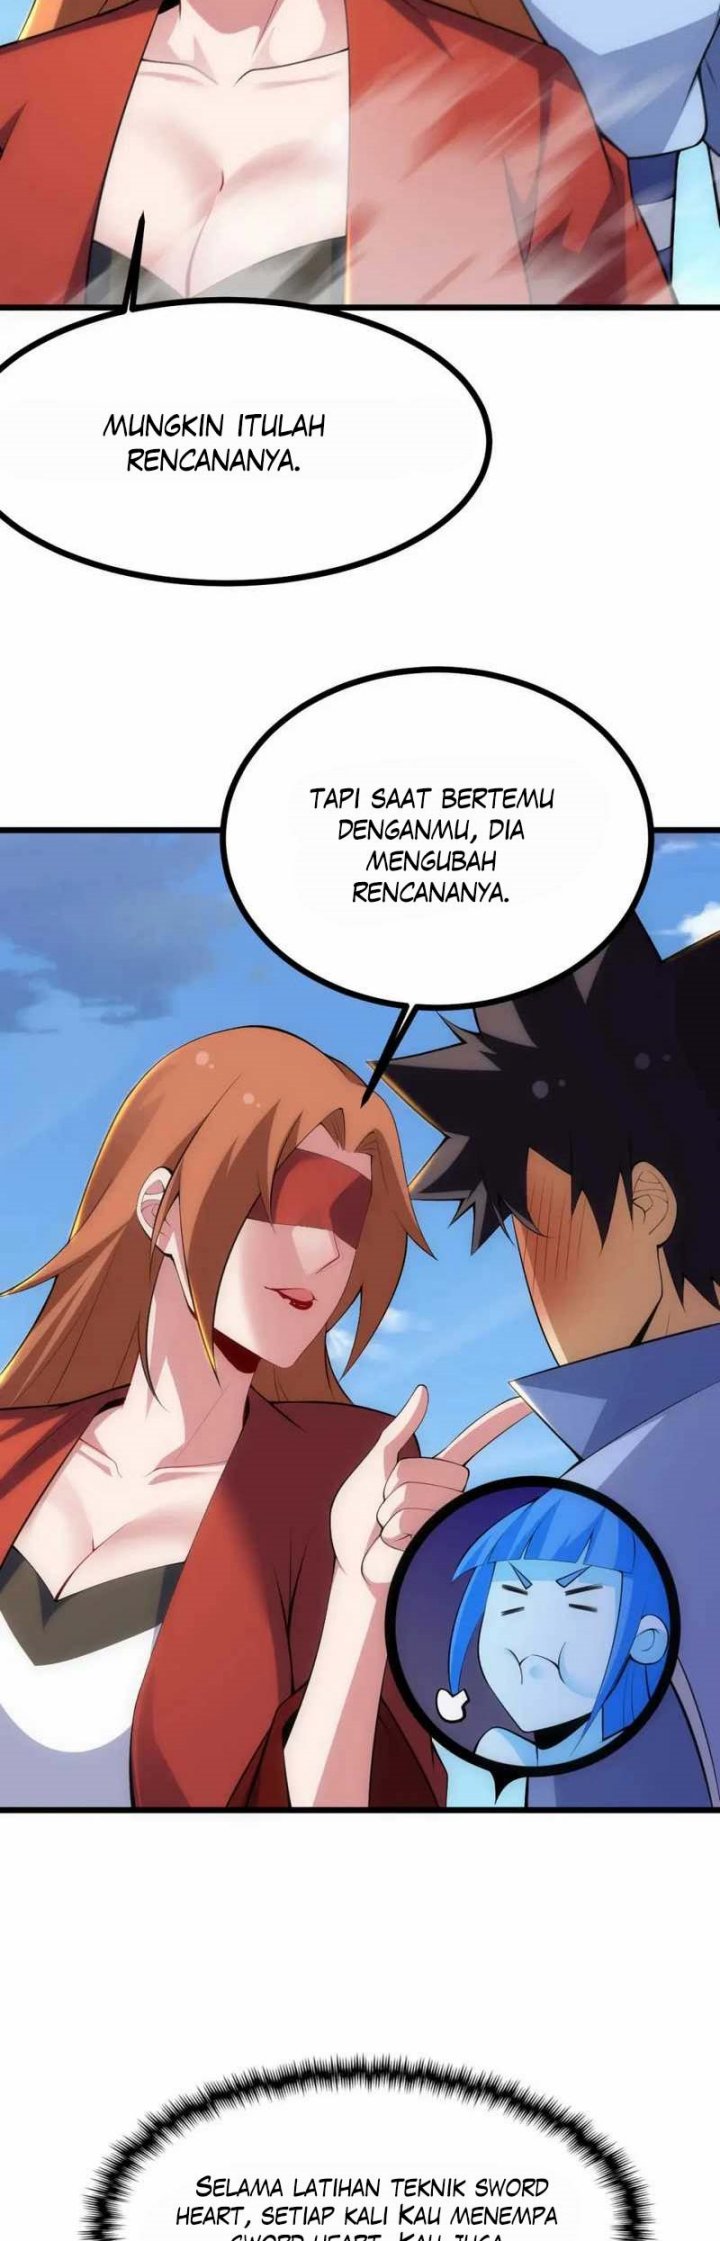 Dilarang COPAS - situs resmi www.mangacanblog.com - Komik i just want to be beaten to death by everyone 179 - chapter 179 180 Indonesia i just want to be beaten to death by everyone 179 - chapter 179 Terbaru 11|Baca Manga Komik Indonesia|Mangacan